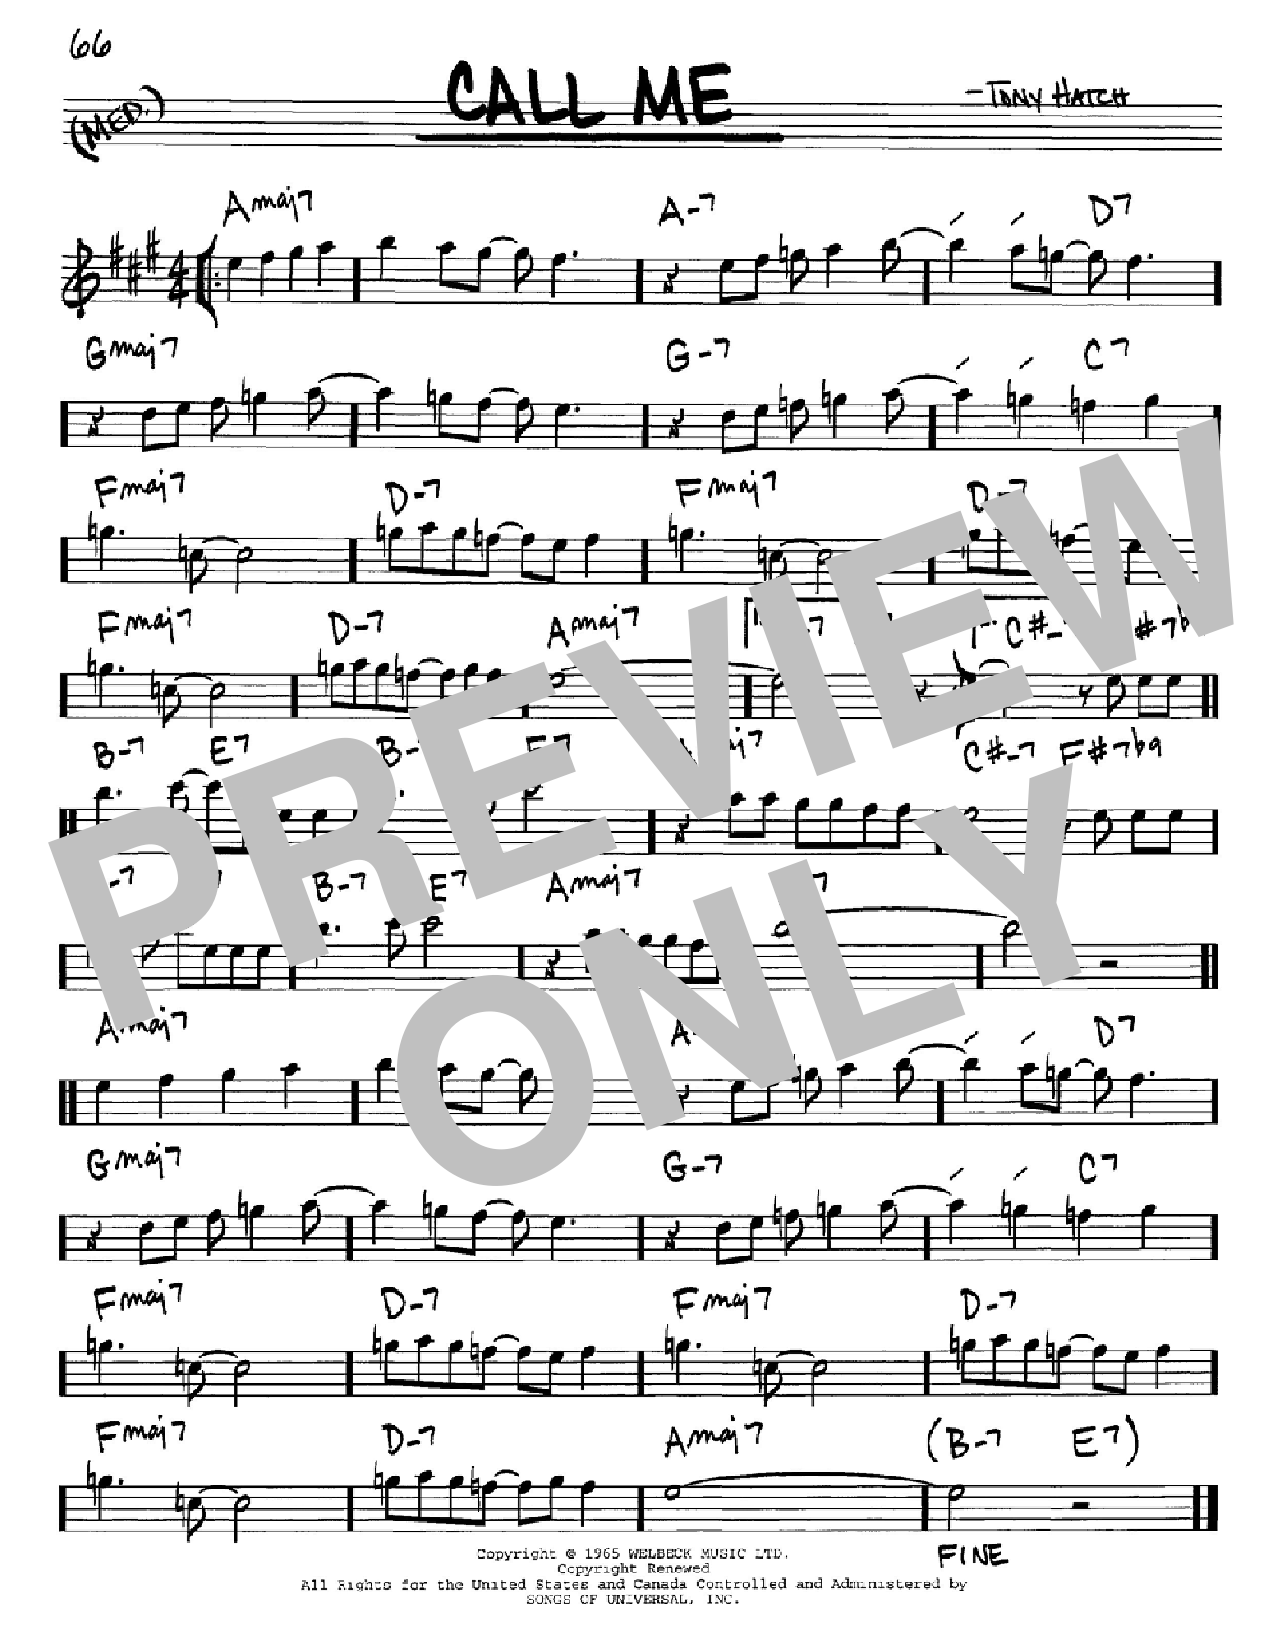 Download Tony Hatch Call Me Sheet Music